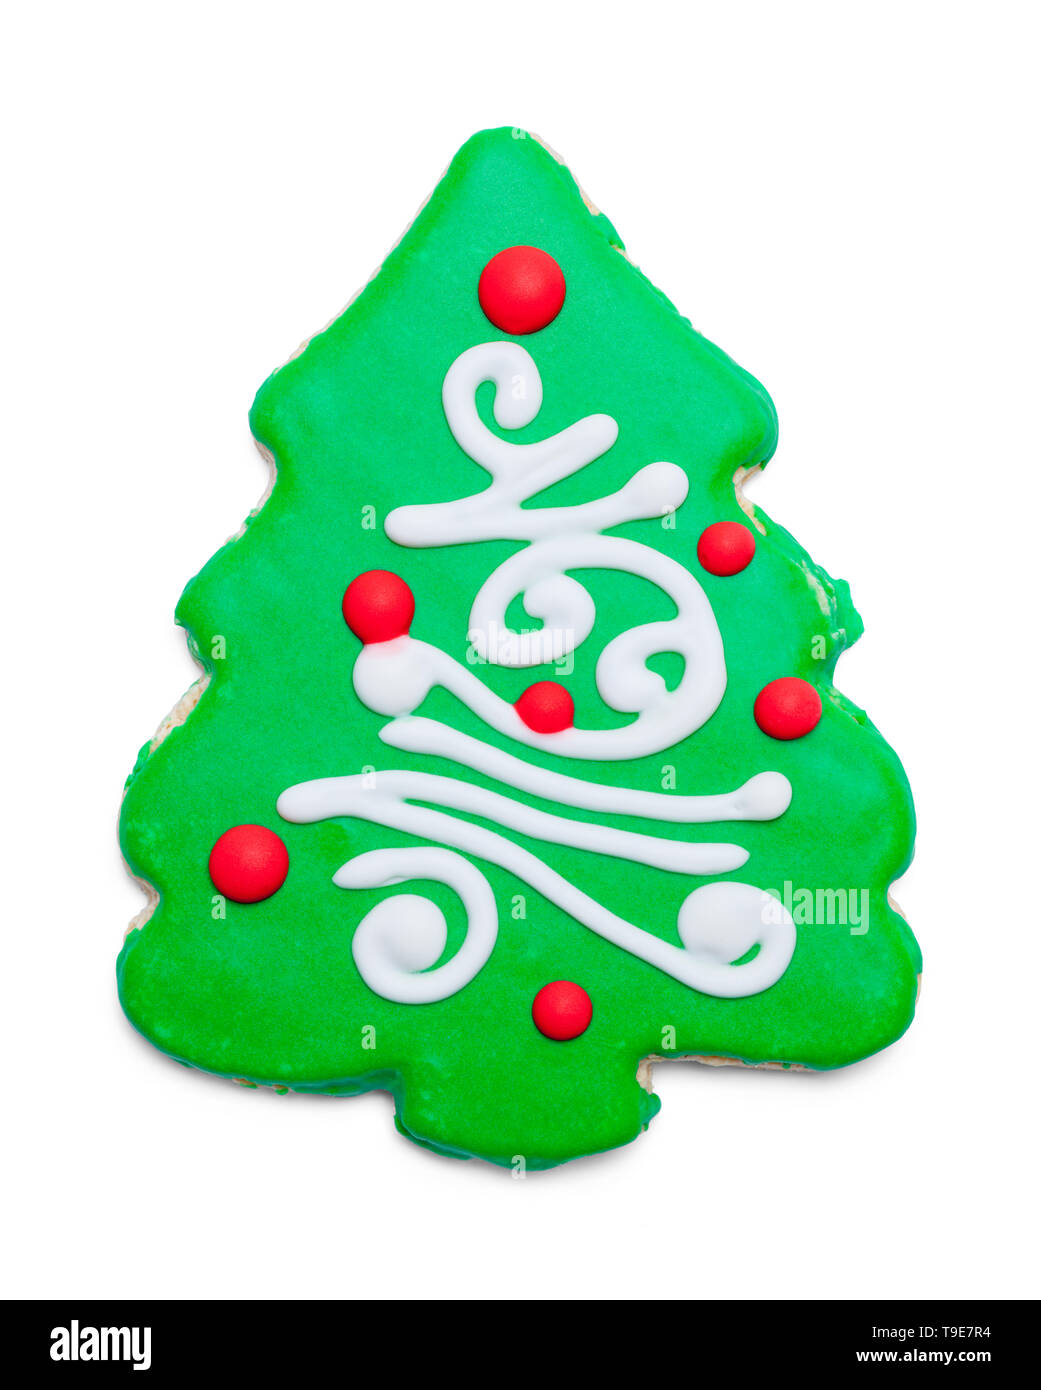 Noël vert Suger Cookie Isolalted sur fond blanc. Banque D'Images